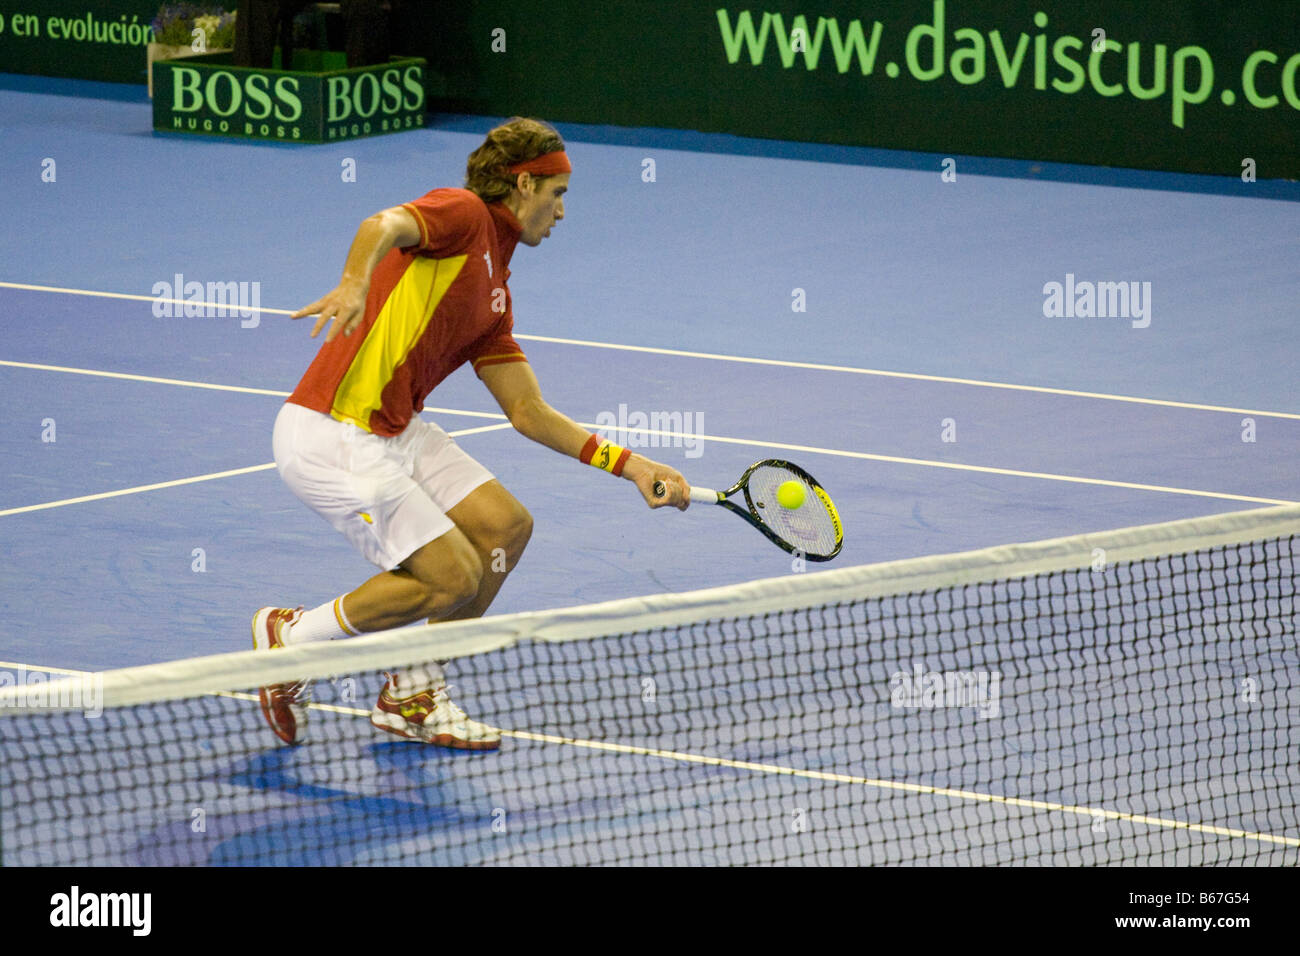 Spanish tennis player Feliciano Lopez hitting a drive shot volley near the net during the 2008 Davis Cup final against argentini Stock Photo